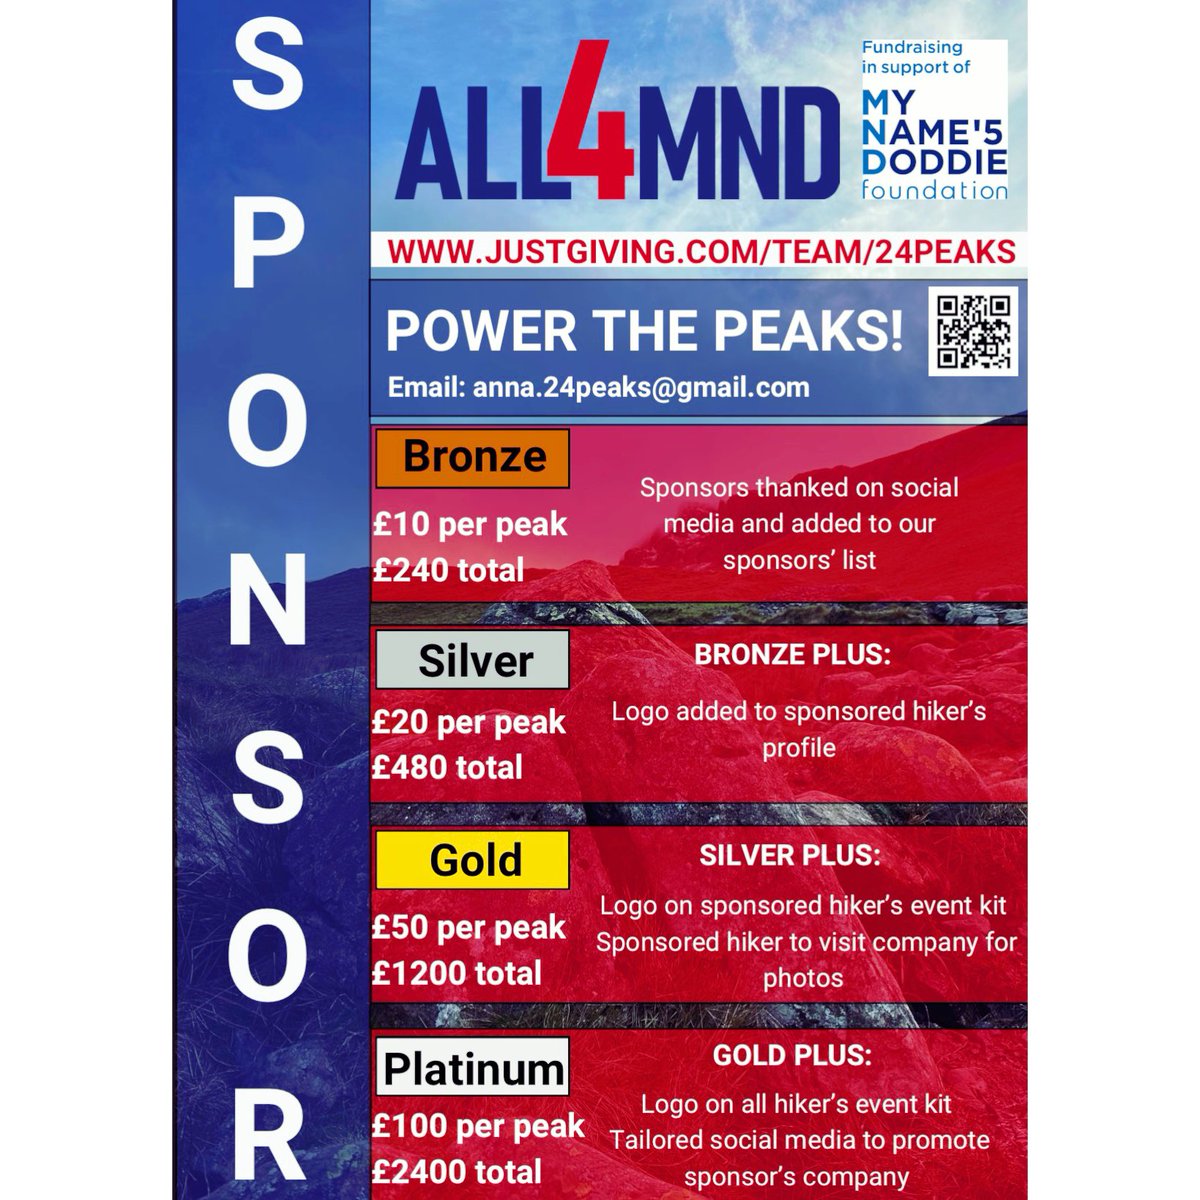 Join these amazing companies in supporting & sponsoring our 24 Peaks in 24 Hours challenge raising funds for My Name'5 Doddie Foundation The lake districts toughest challenge, don’t miss out on being part of something special. Contact us today 💙⛰️🥾 #mnd